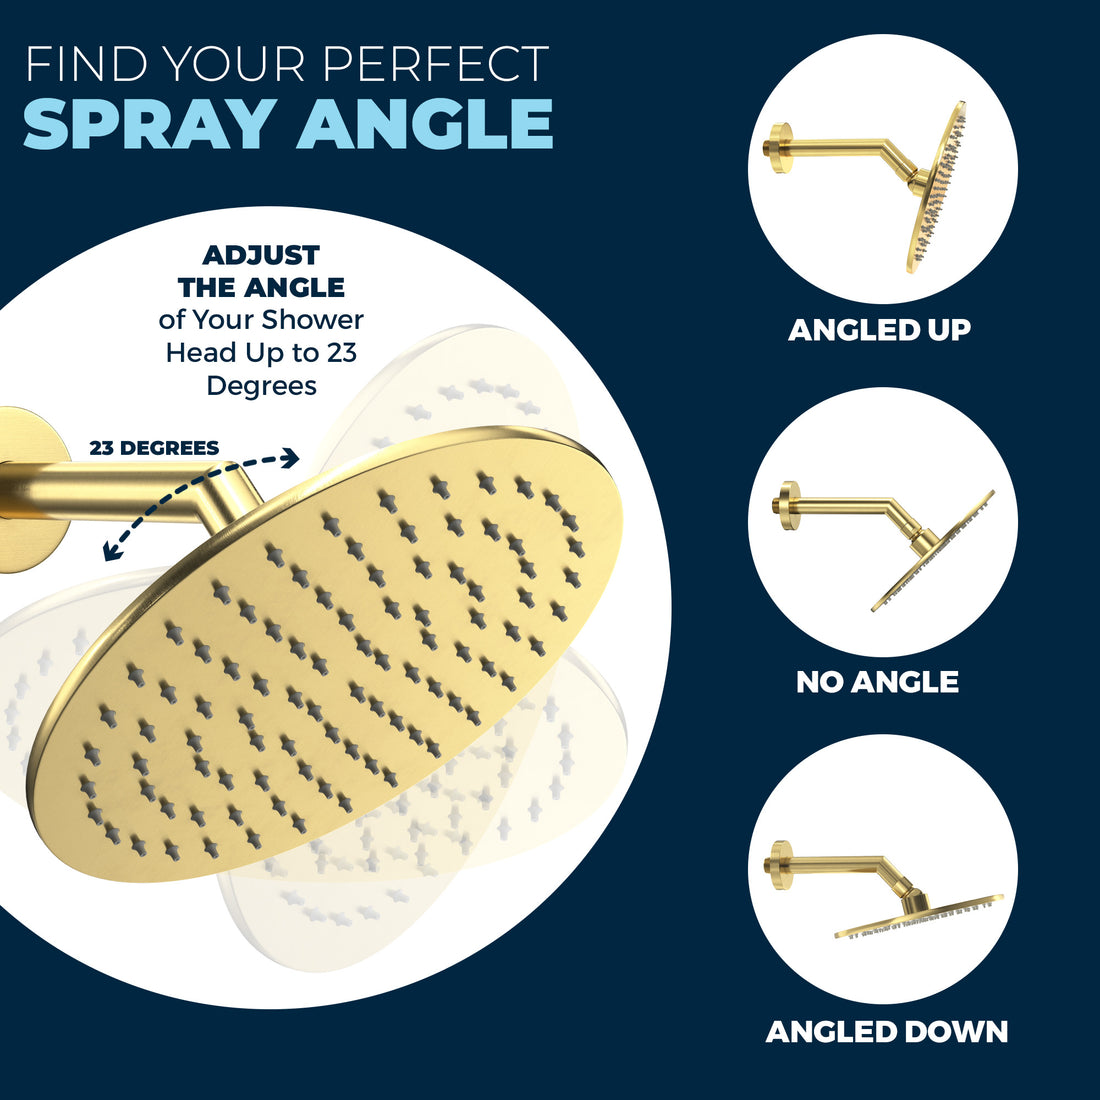 Benefit 2 All Metal 8 Inch Rain Shower Head with 2.5 GPM Rainfall Spray - Canada Brushed Gold / 2.5 - The Shower Head Store